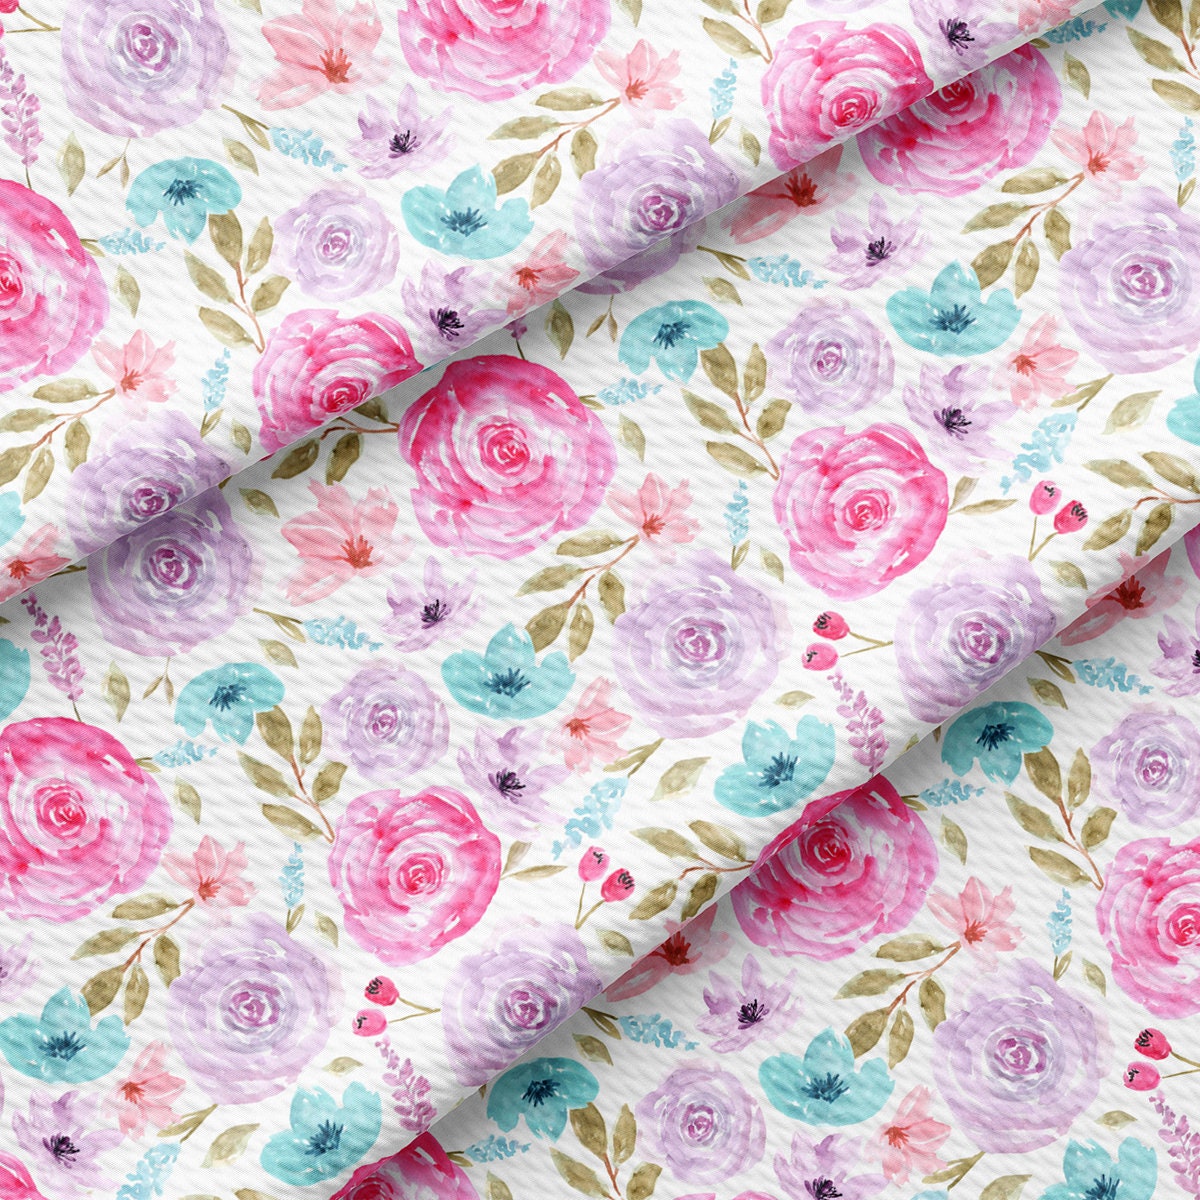 Floral Bullet Textured Fabric  AA1842